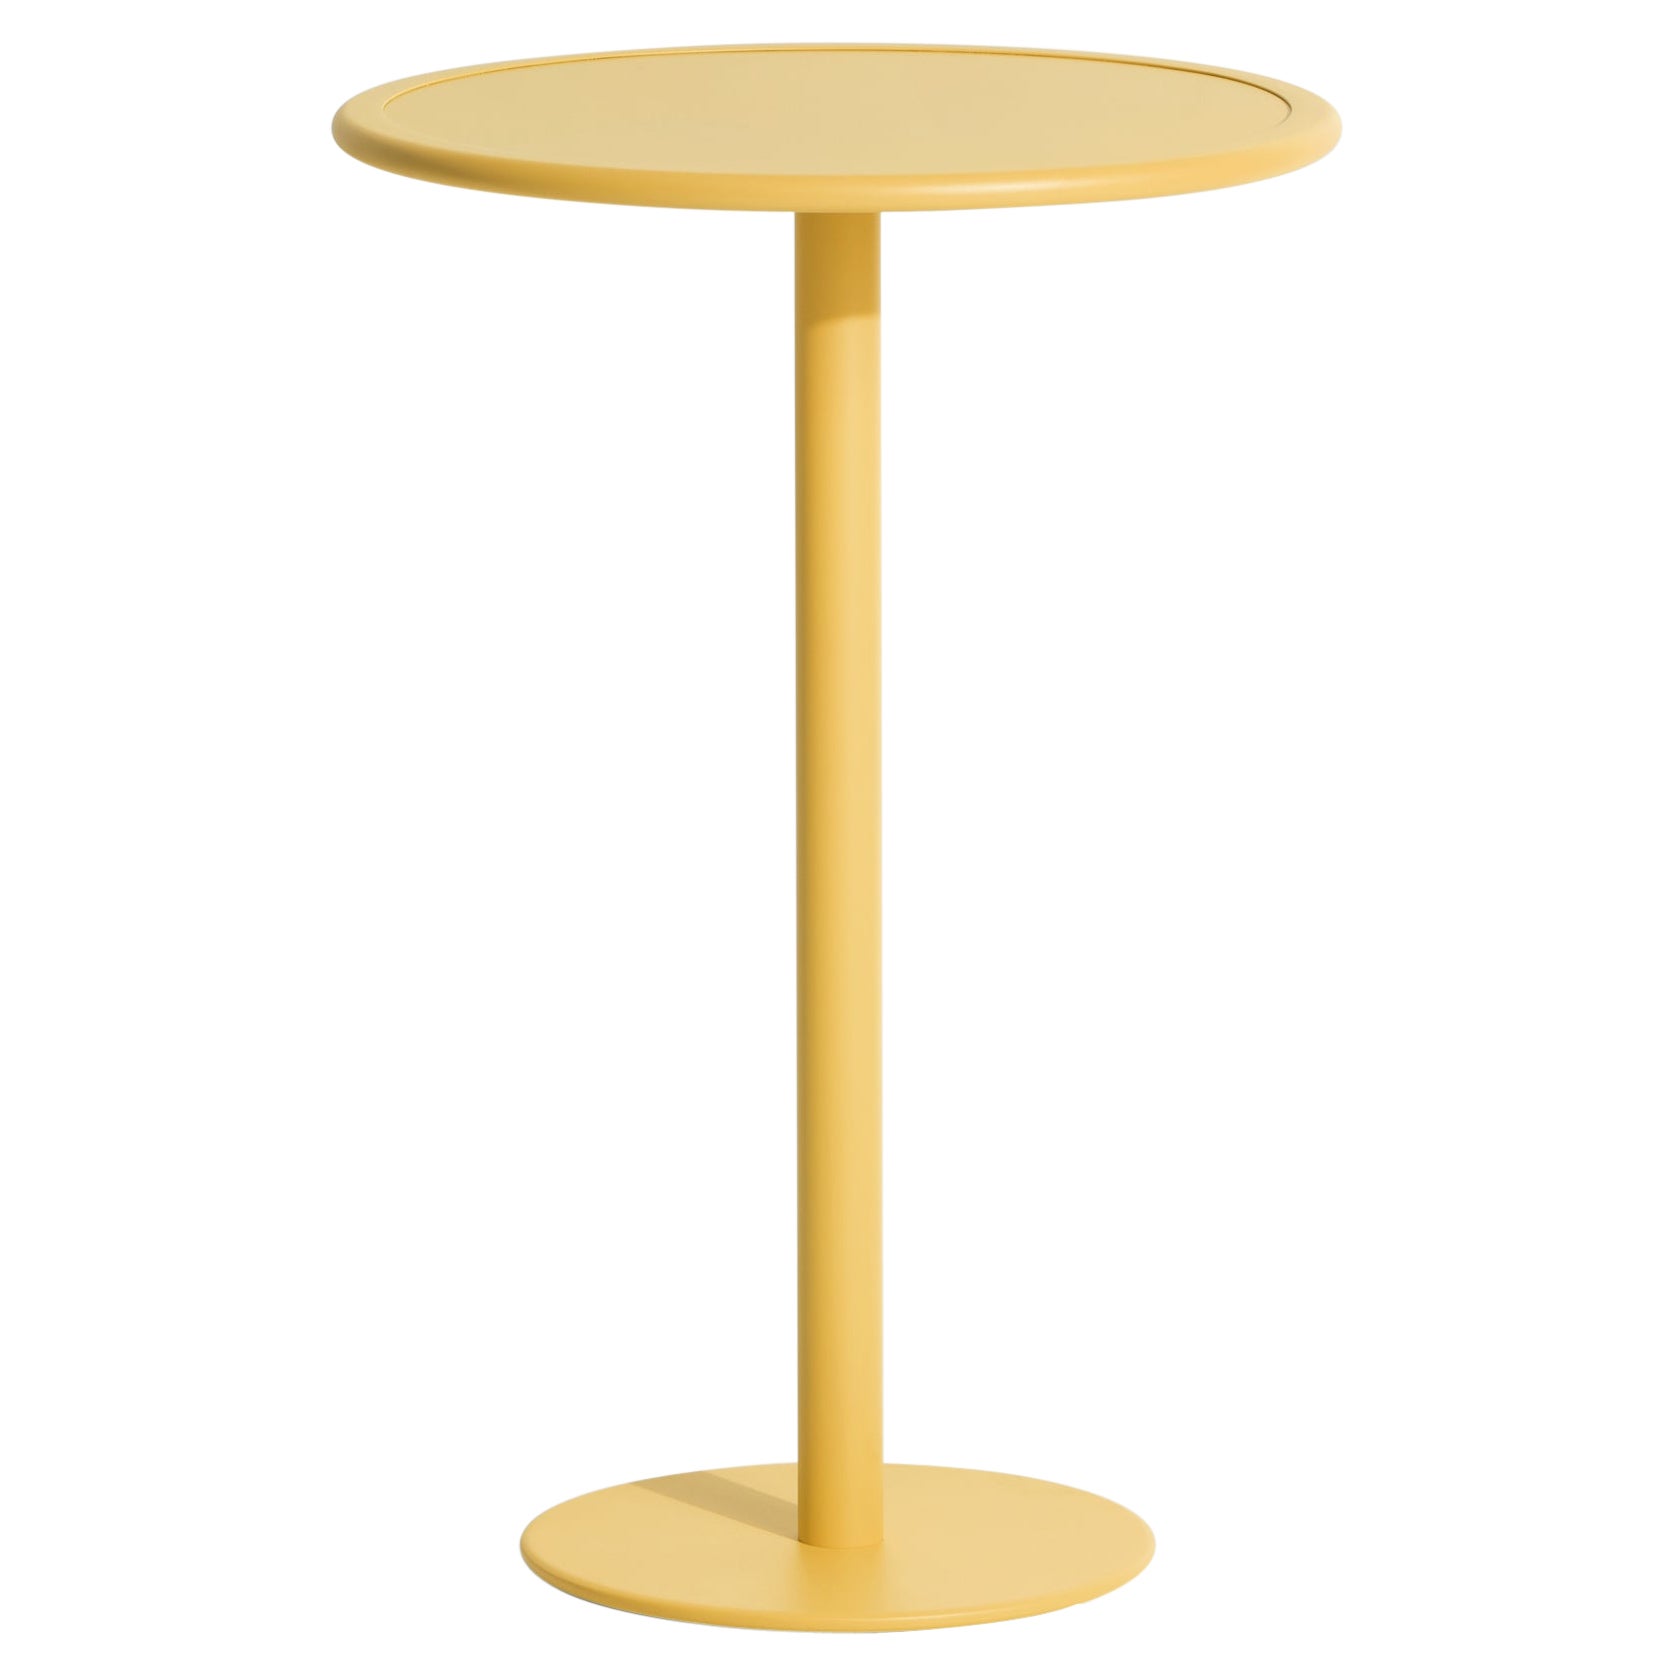 Petite Friture Week-End Round High Table in Saffron Aluminium, 2017 For Sale